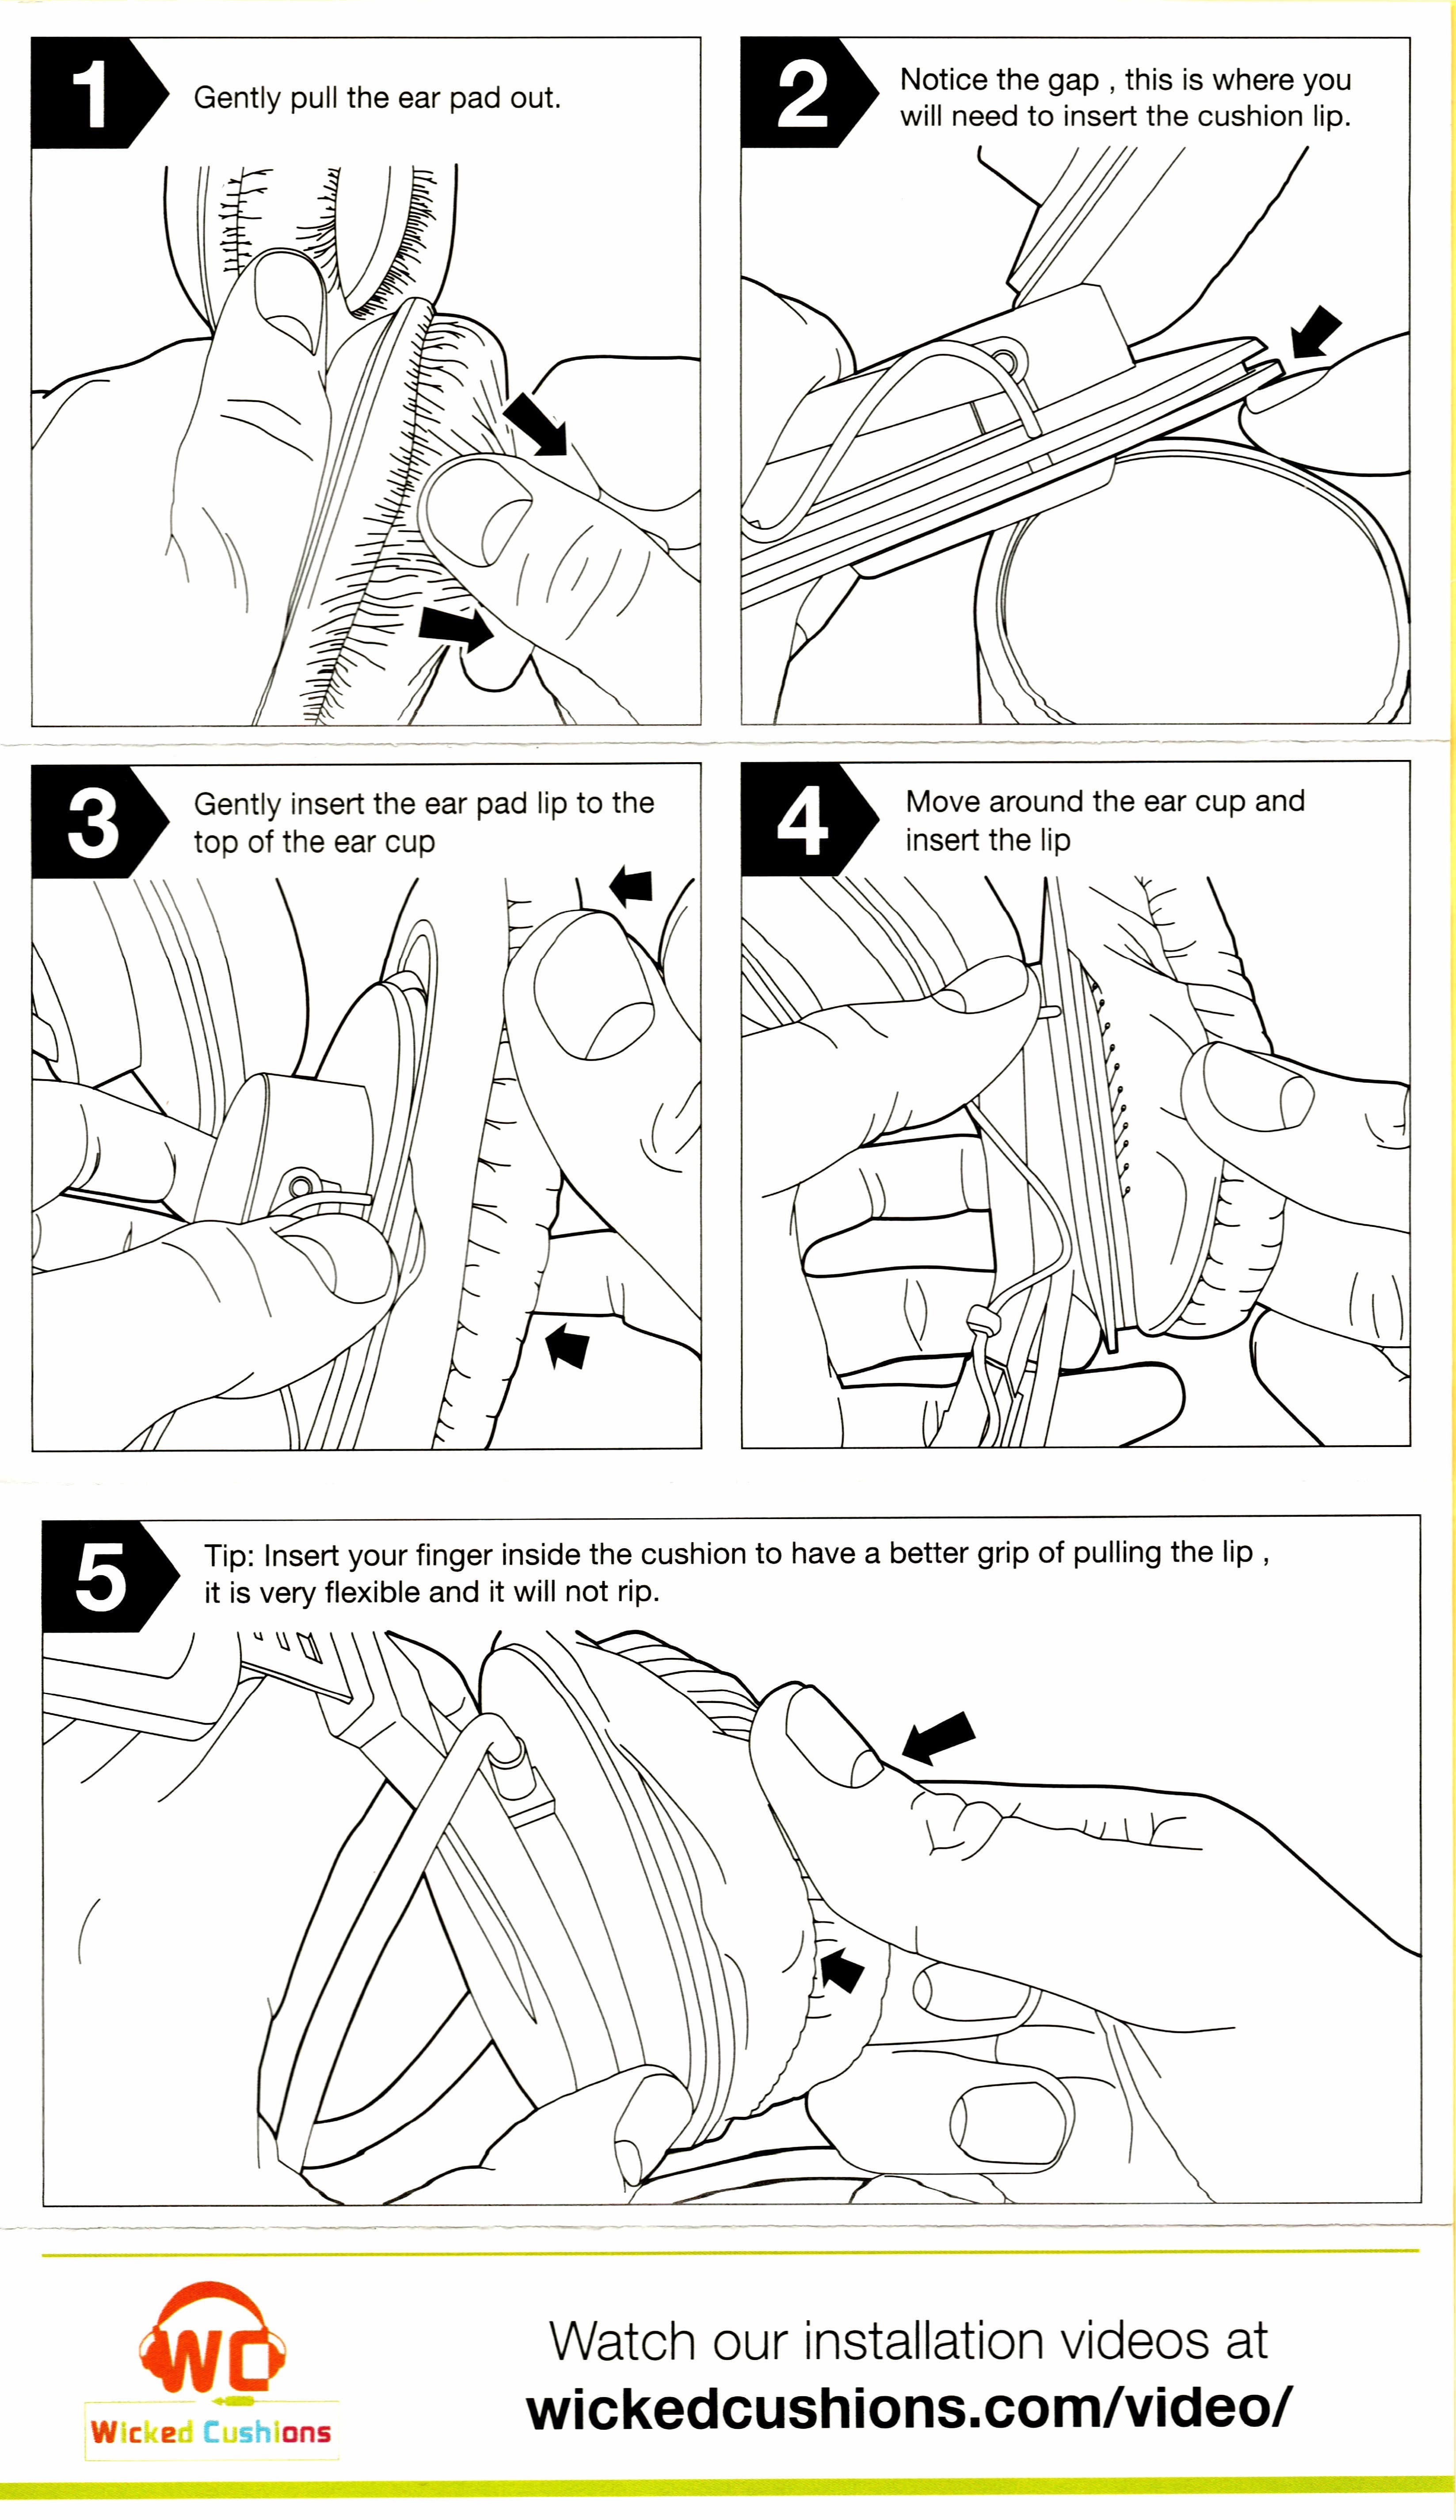 Wicked Cushions Upgraded Gaming Earpads installation instructions. 1: Gently pull the [old] ear pad out. 2: Notice the gap, this is where you will need to insert the cushion lip [on the new pad]. 3: Gently insert the ear pad lip to the top of the ear cup. 4: Move around the ear cup and insert the lip. 5: Tip: Insert your finger inside the cushion to have a better grip of pulling the lip, it is very flexible and it will not rip.